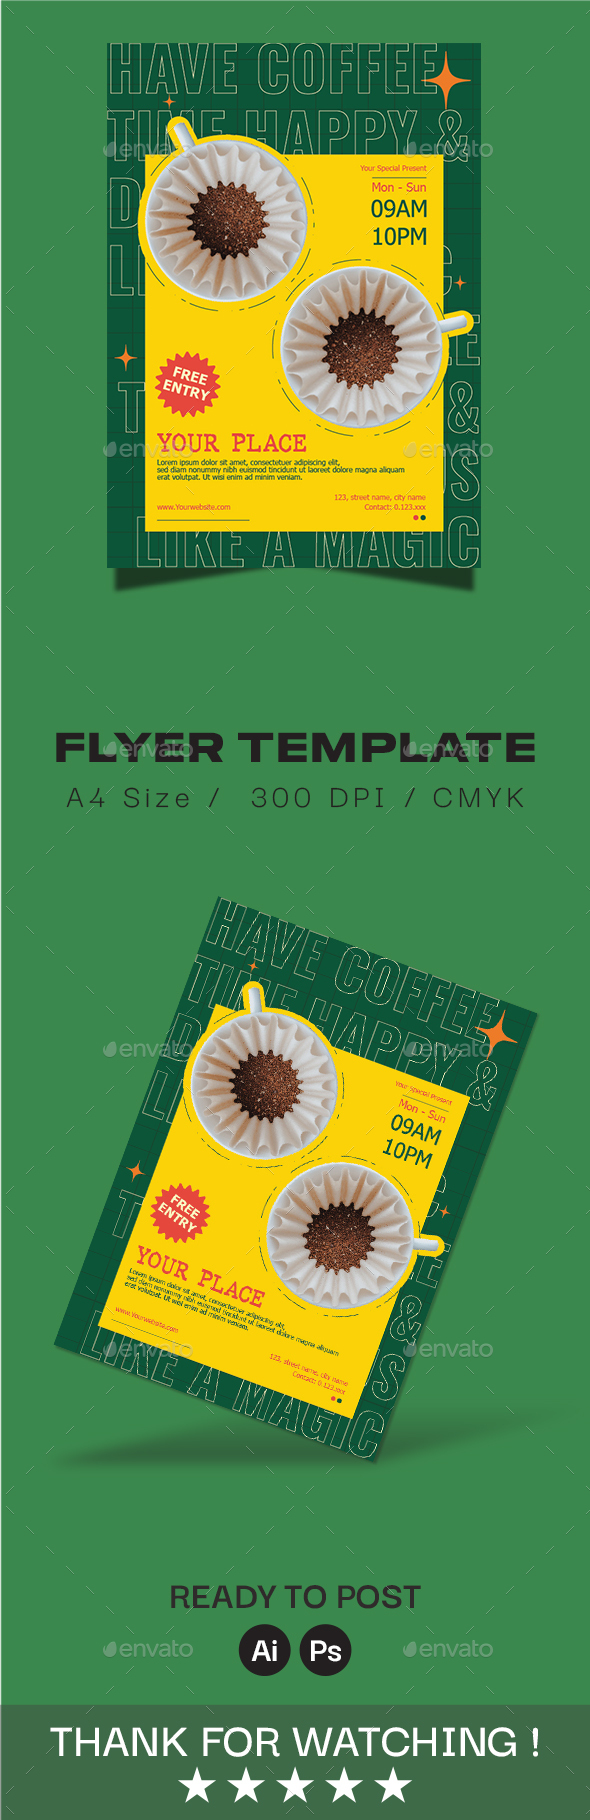 [DOWNLOAD]Coffee Flyer